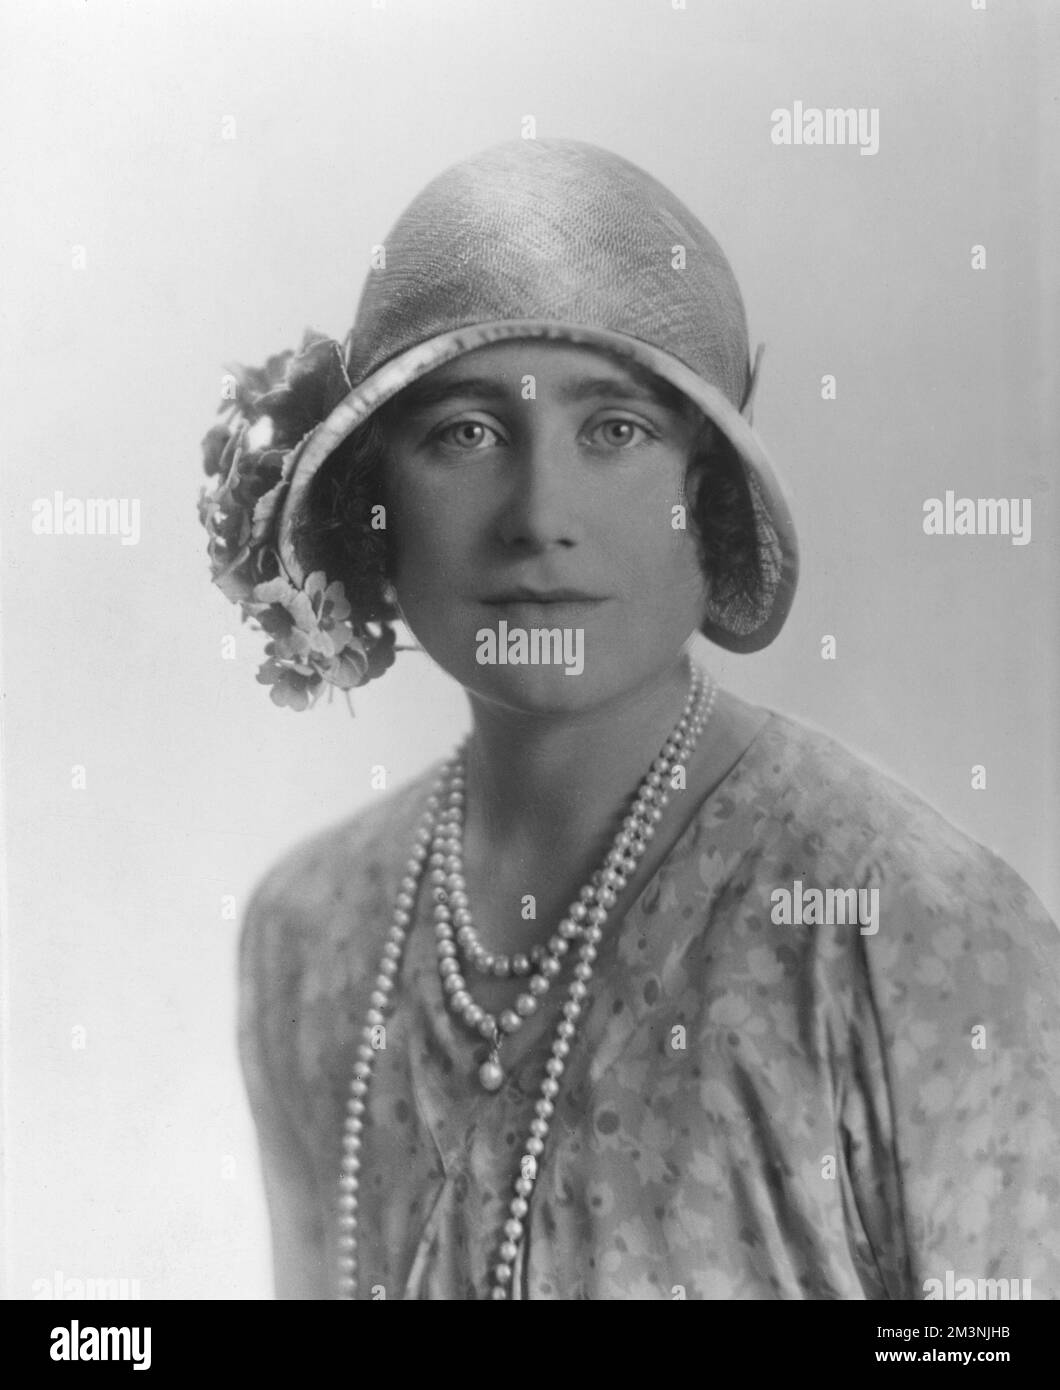 Lady Elizabeth Angela Marguerite Bowes-Lyon (1900-2002), later Duchess of York, Queen Elizabeth and then Queen Mother (to Queen Elizabeth II).  Wife of King George VI.  Pictured wearing a floral dress, cloche hat and pearls in 1929     Date: 1929 Stock Photo